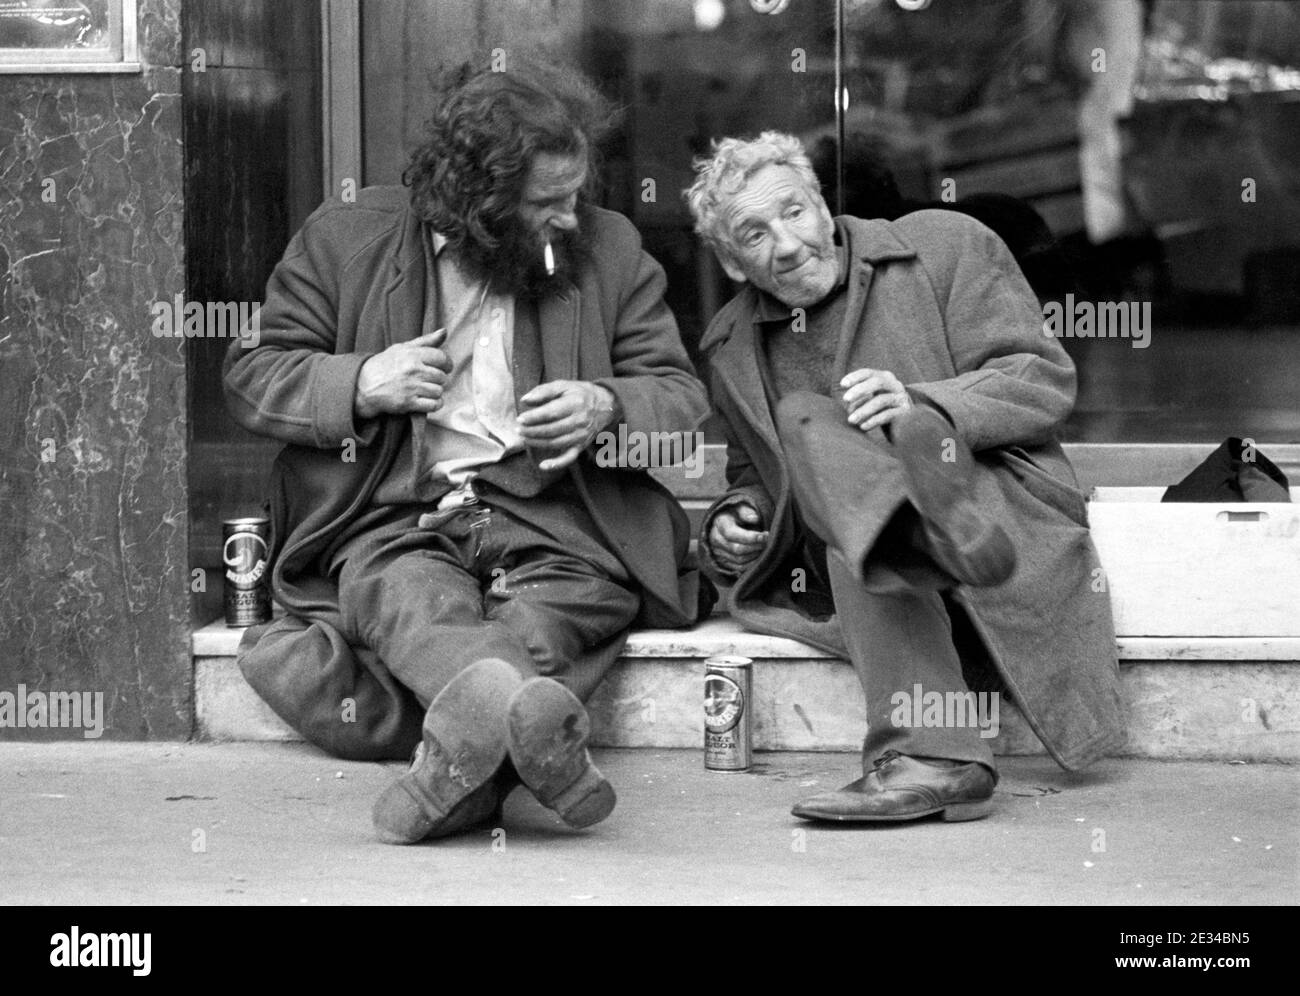 English tramps High Resolution Stock Photography and Images - Alamy